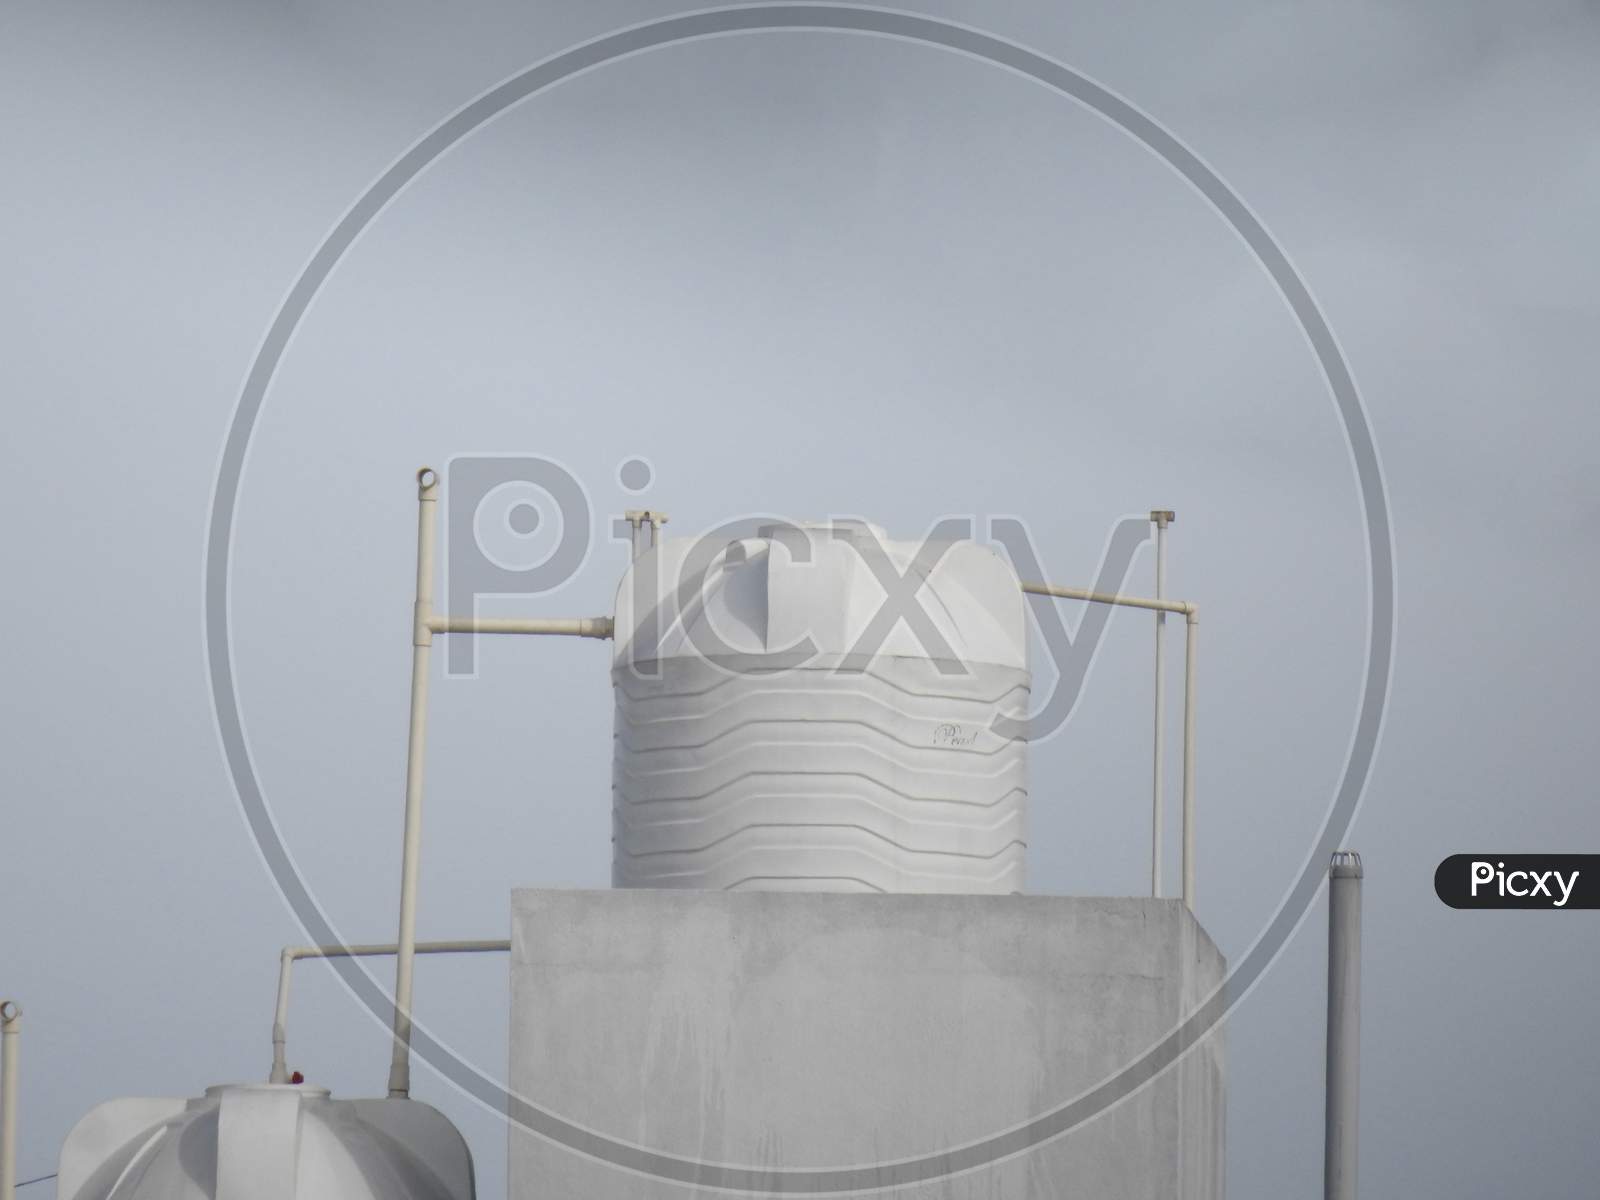 White, Yellow And Black Color Plastic Water Tank At The Top Of The Building In The City